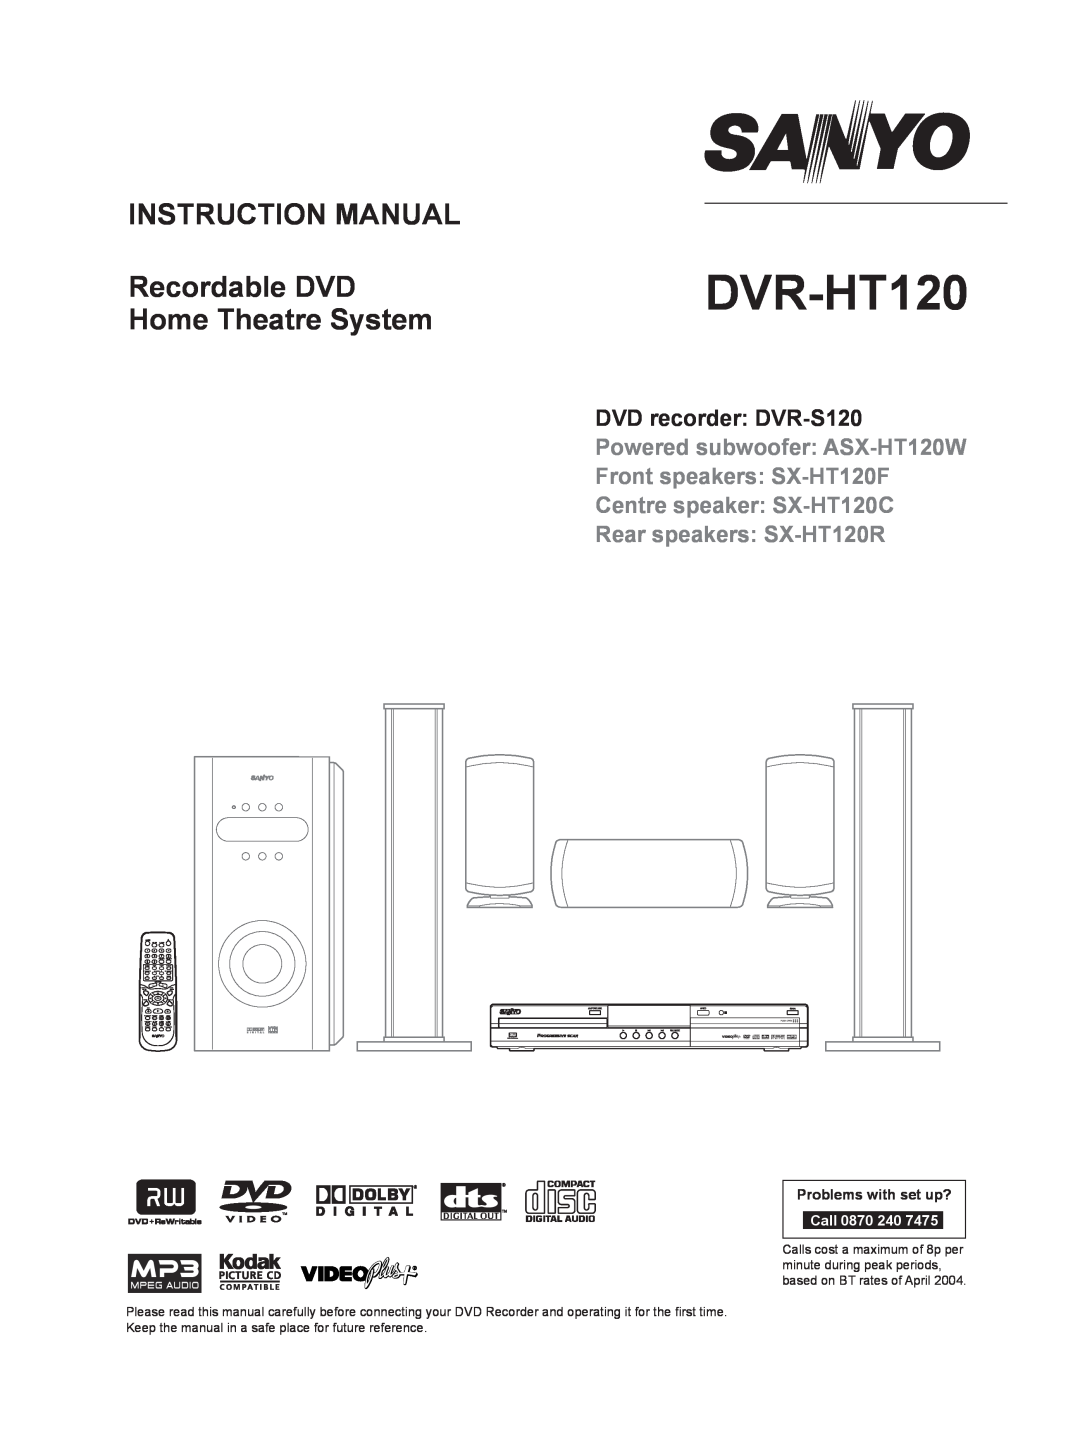 Sanyo DVR-HT120 instruction manual Recordable DVD Home Theatre System, Call, DVD recorder DVR-S120 